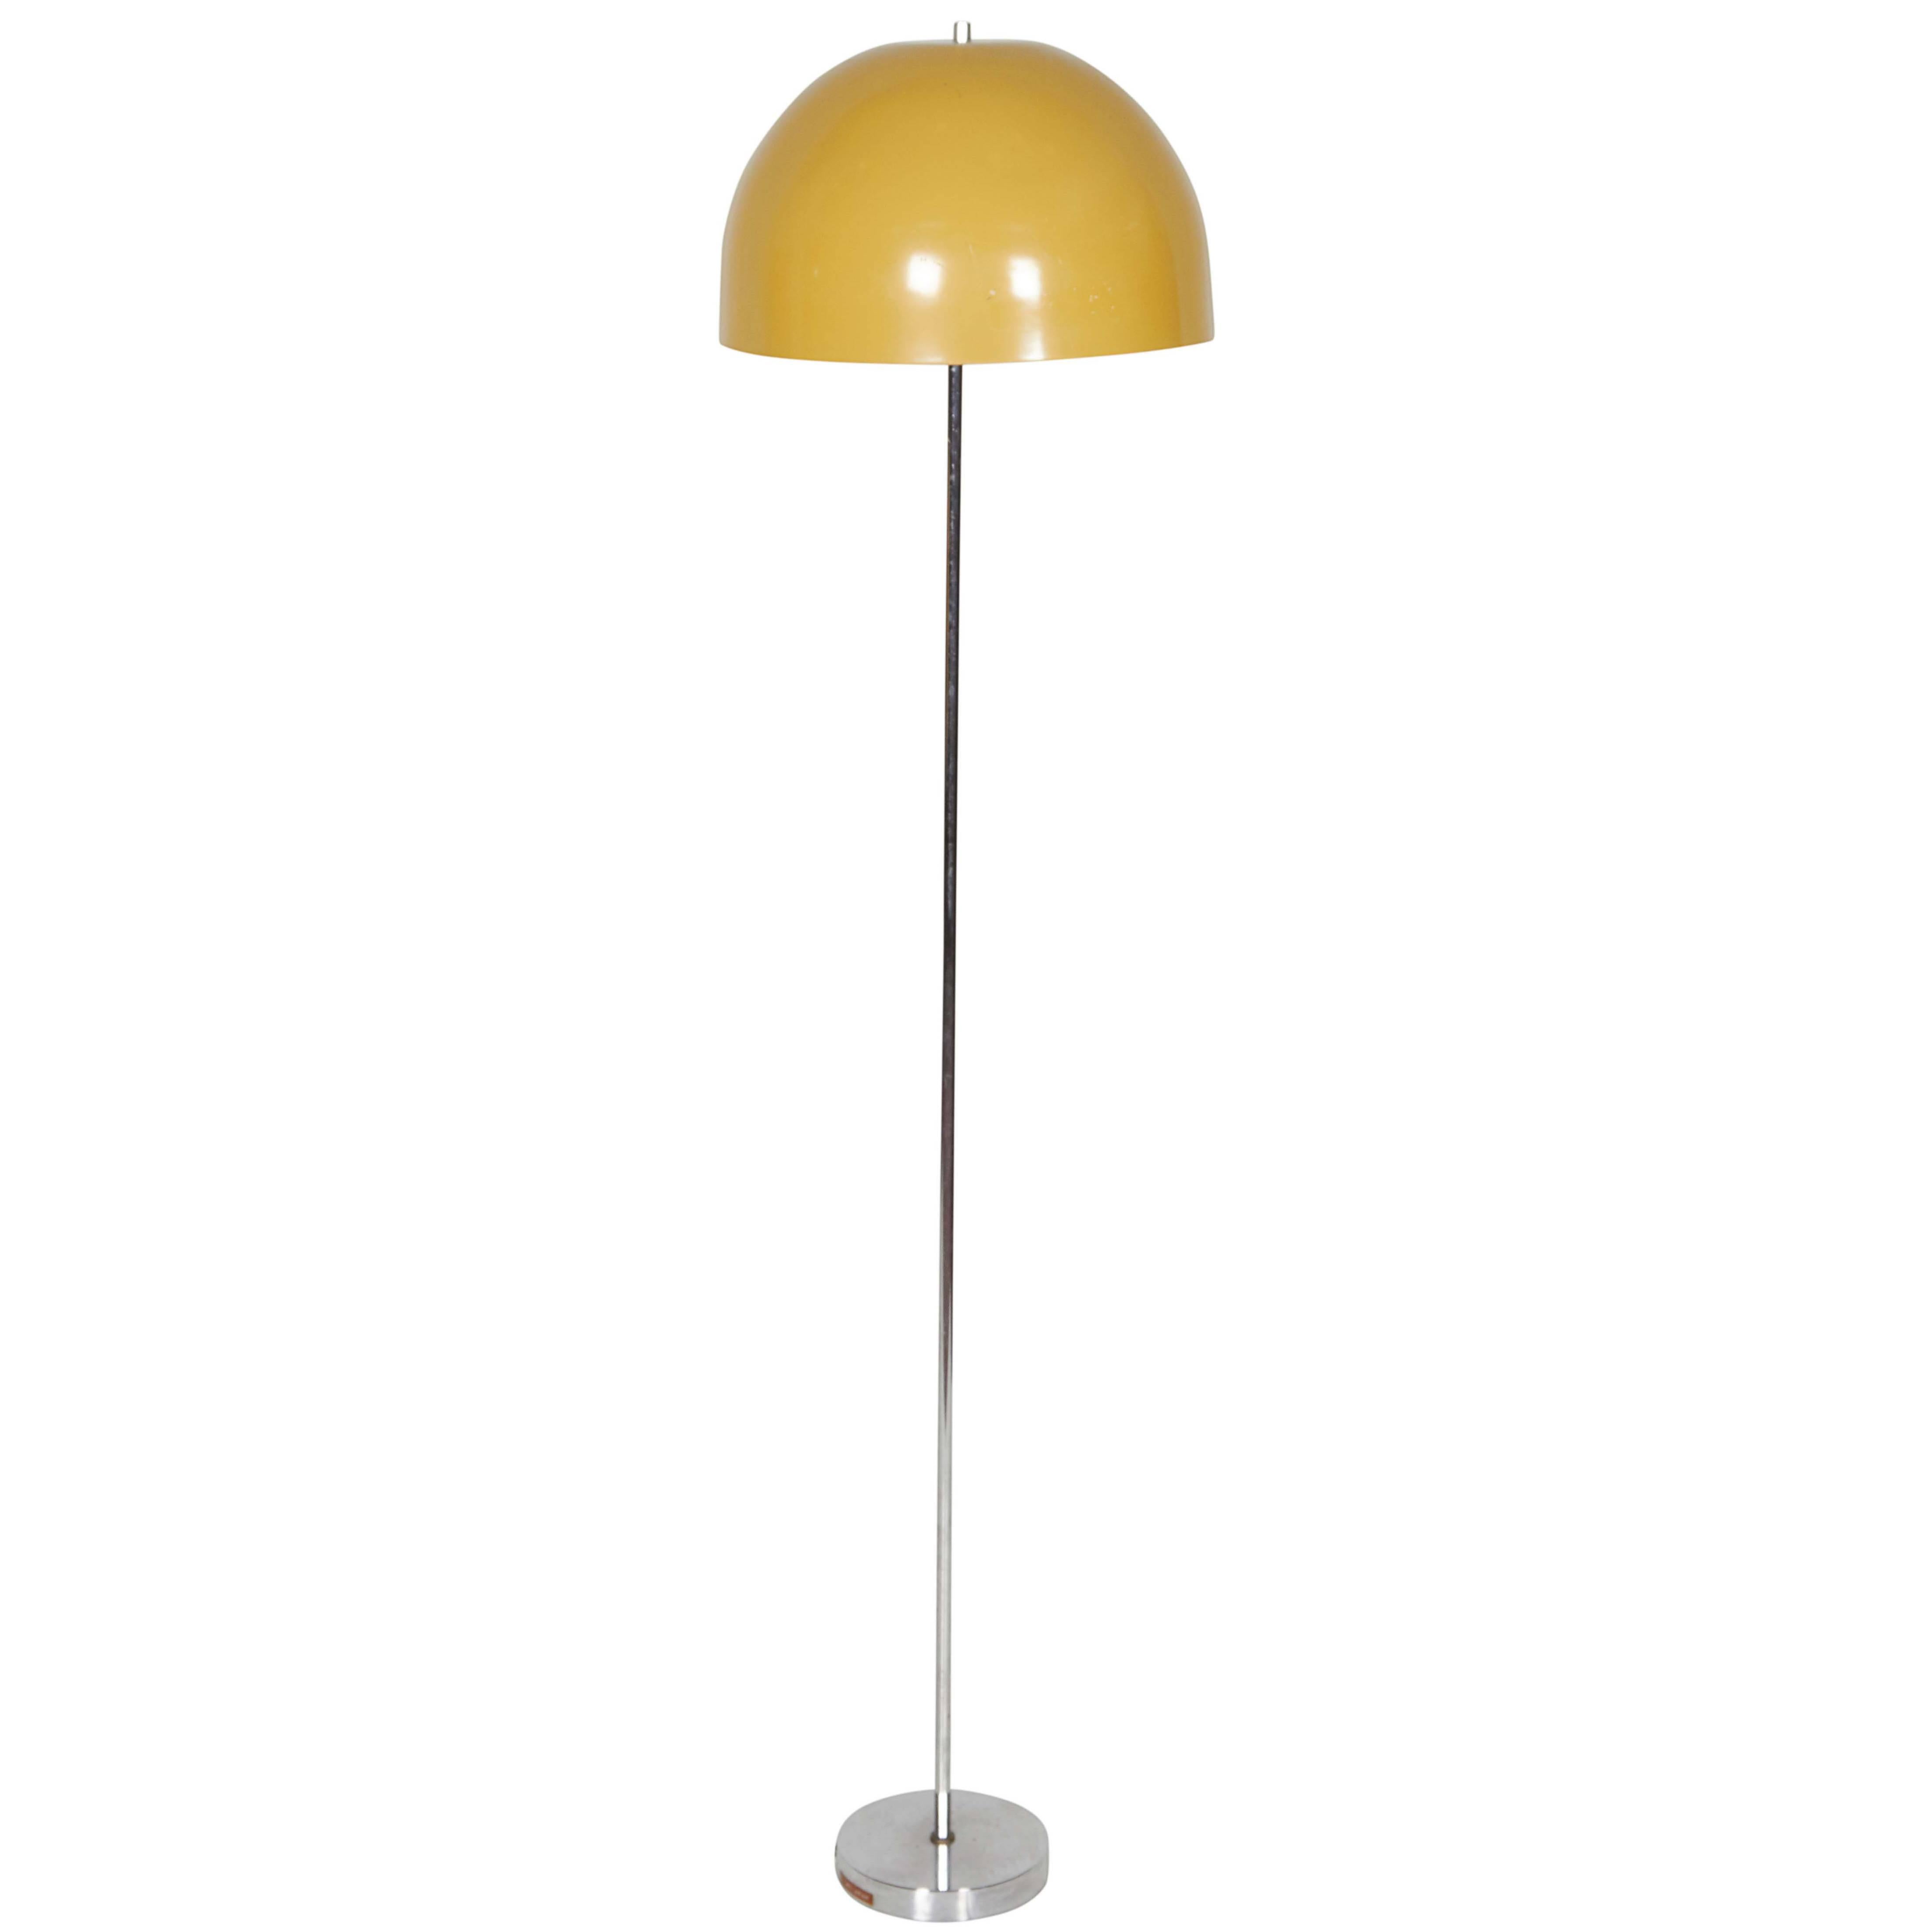 1960s Dome Shade Floor Lamp